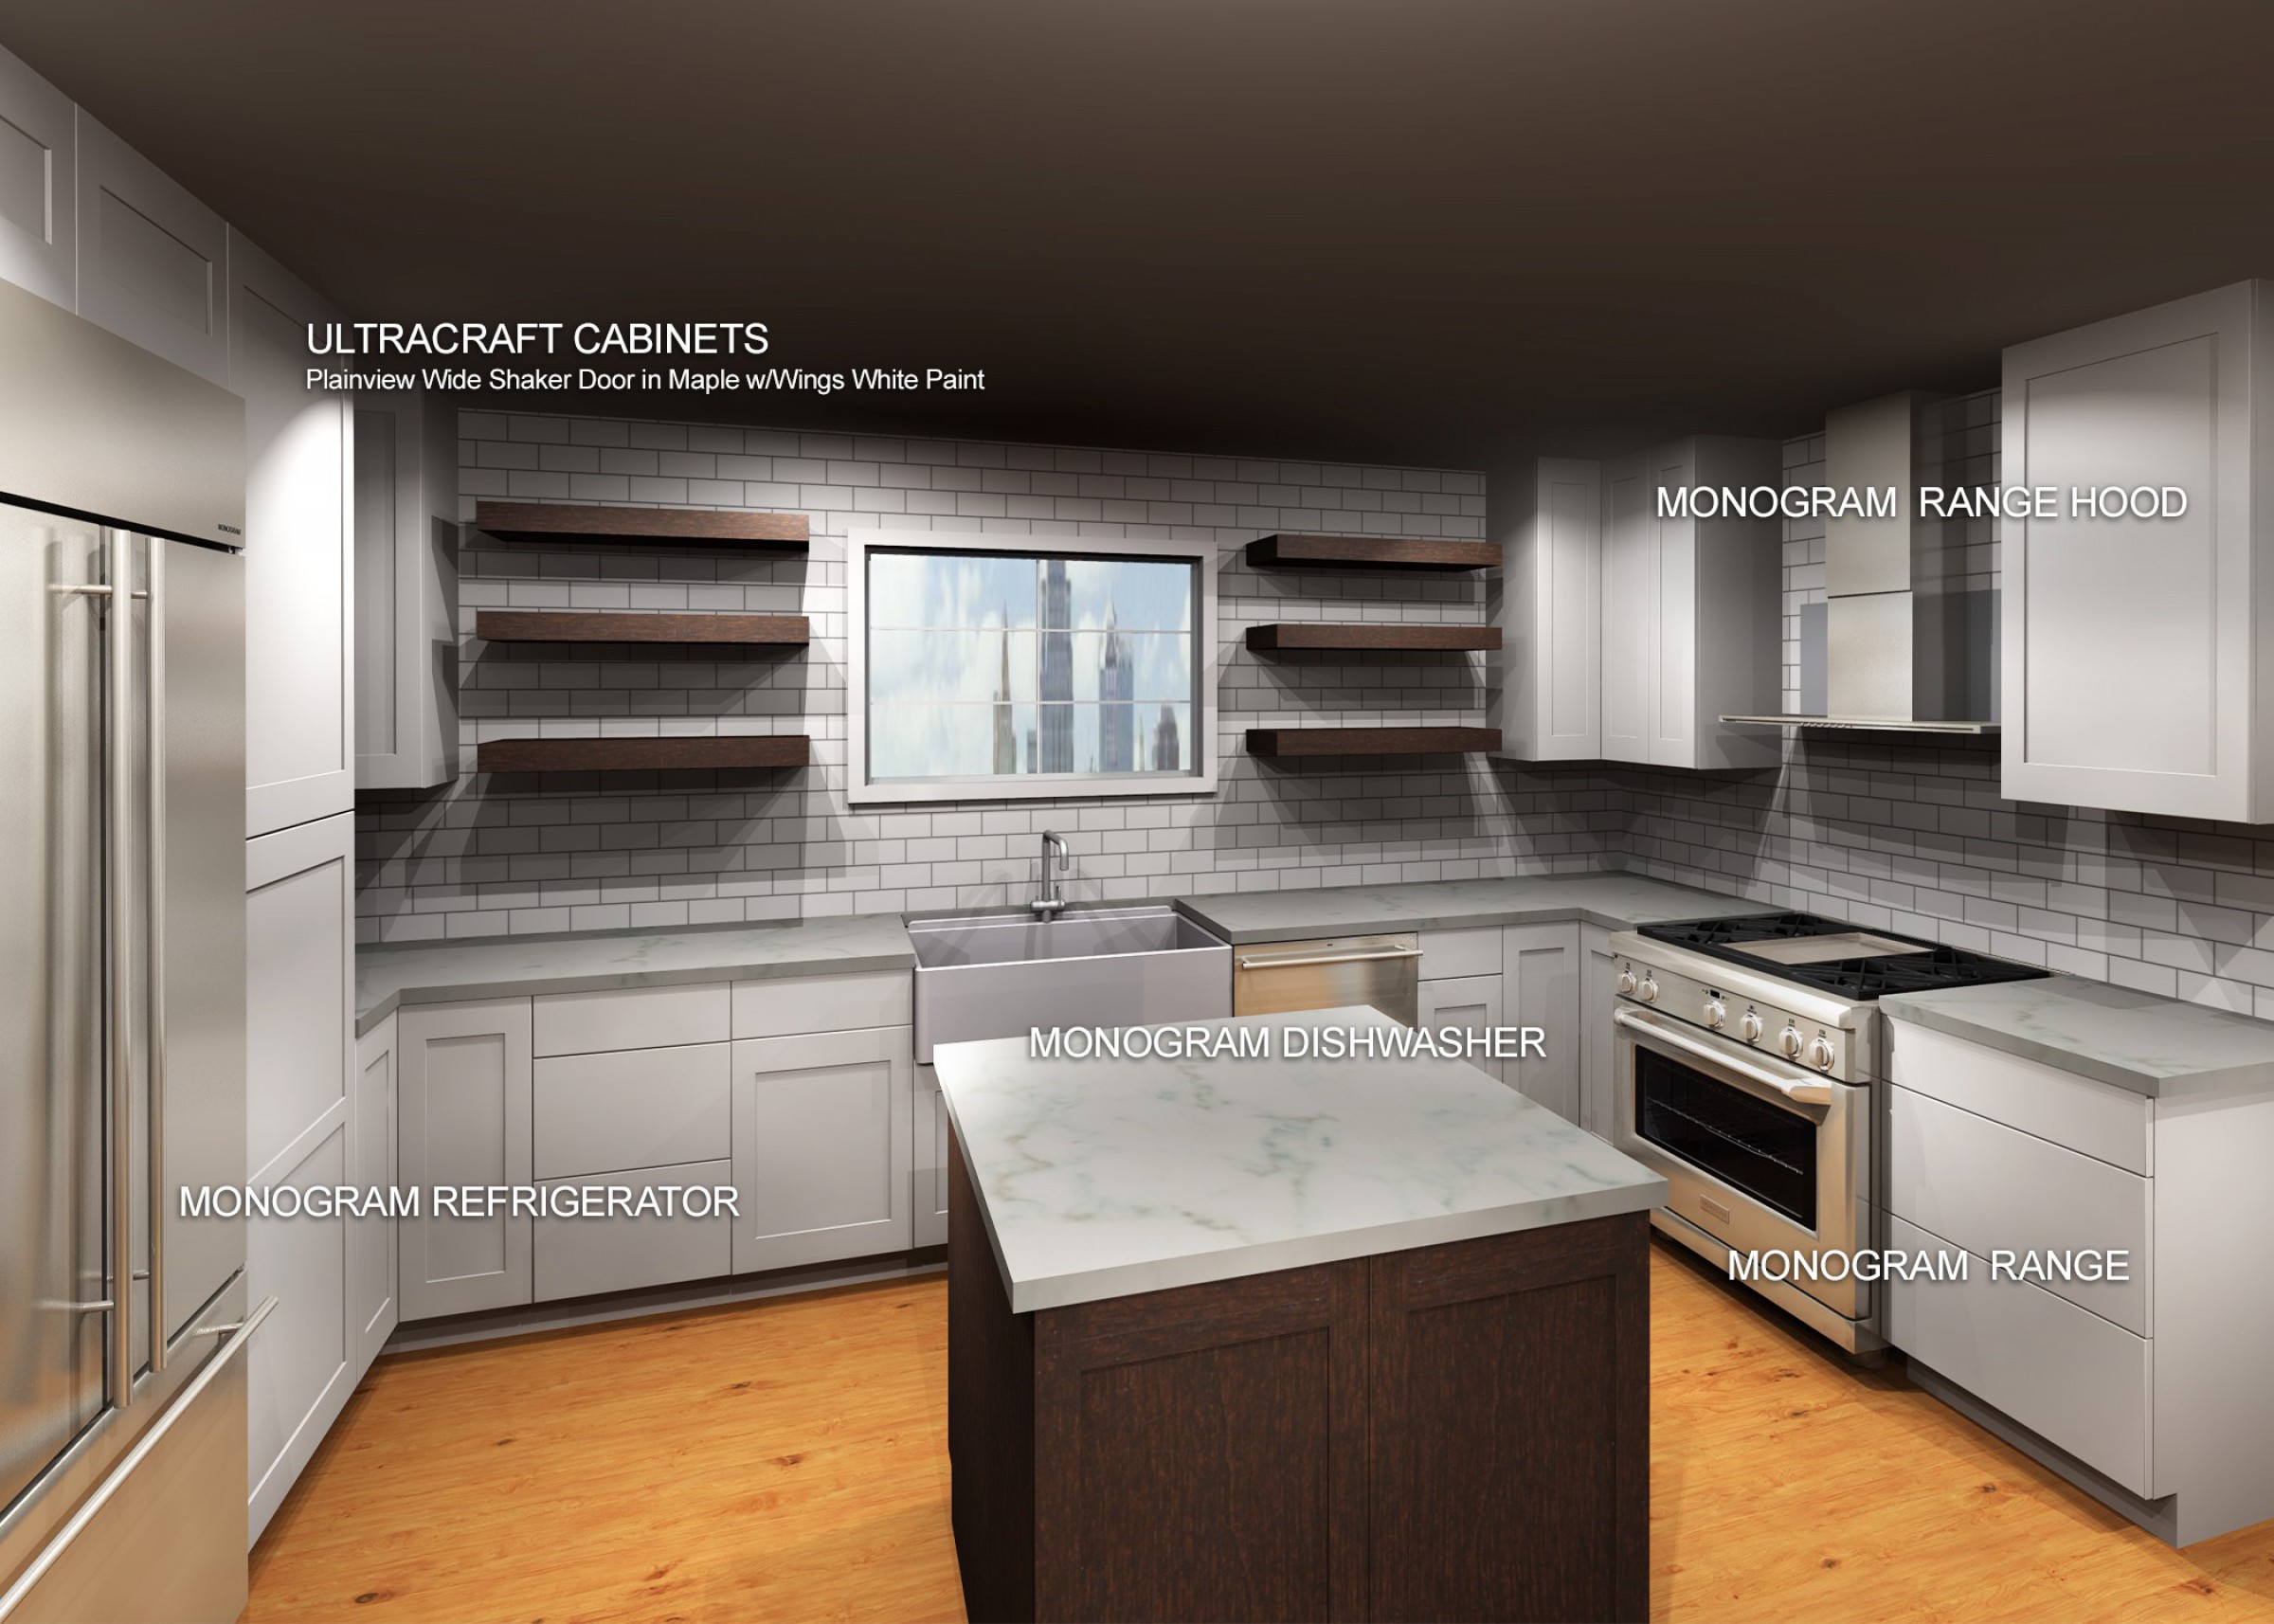 Ultracraft Cabinets With Monogram Appliance Package Discount